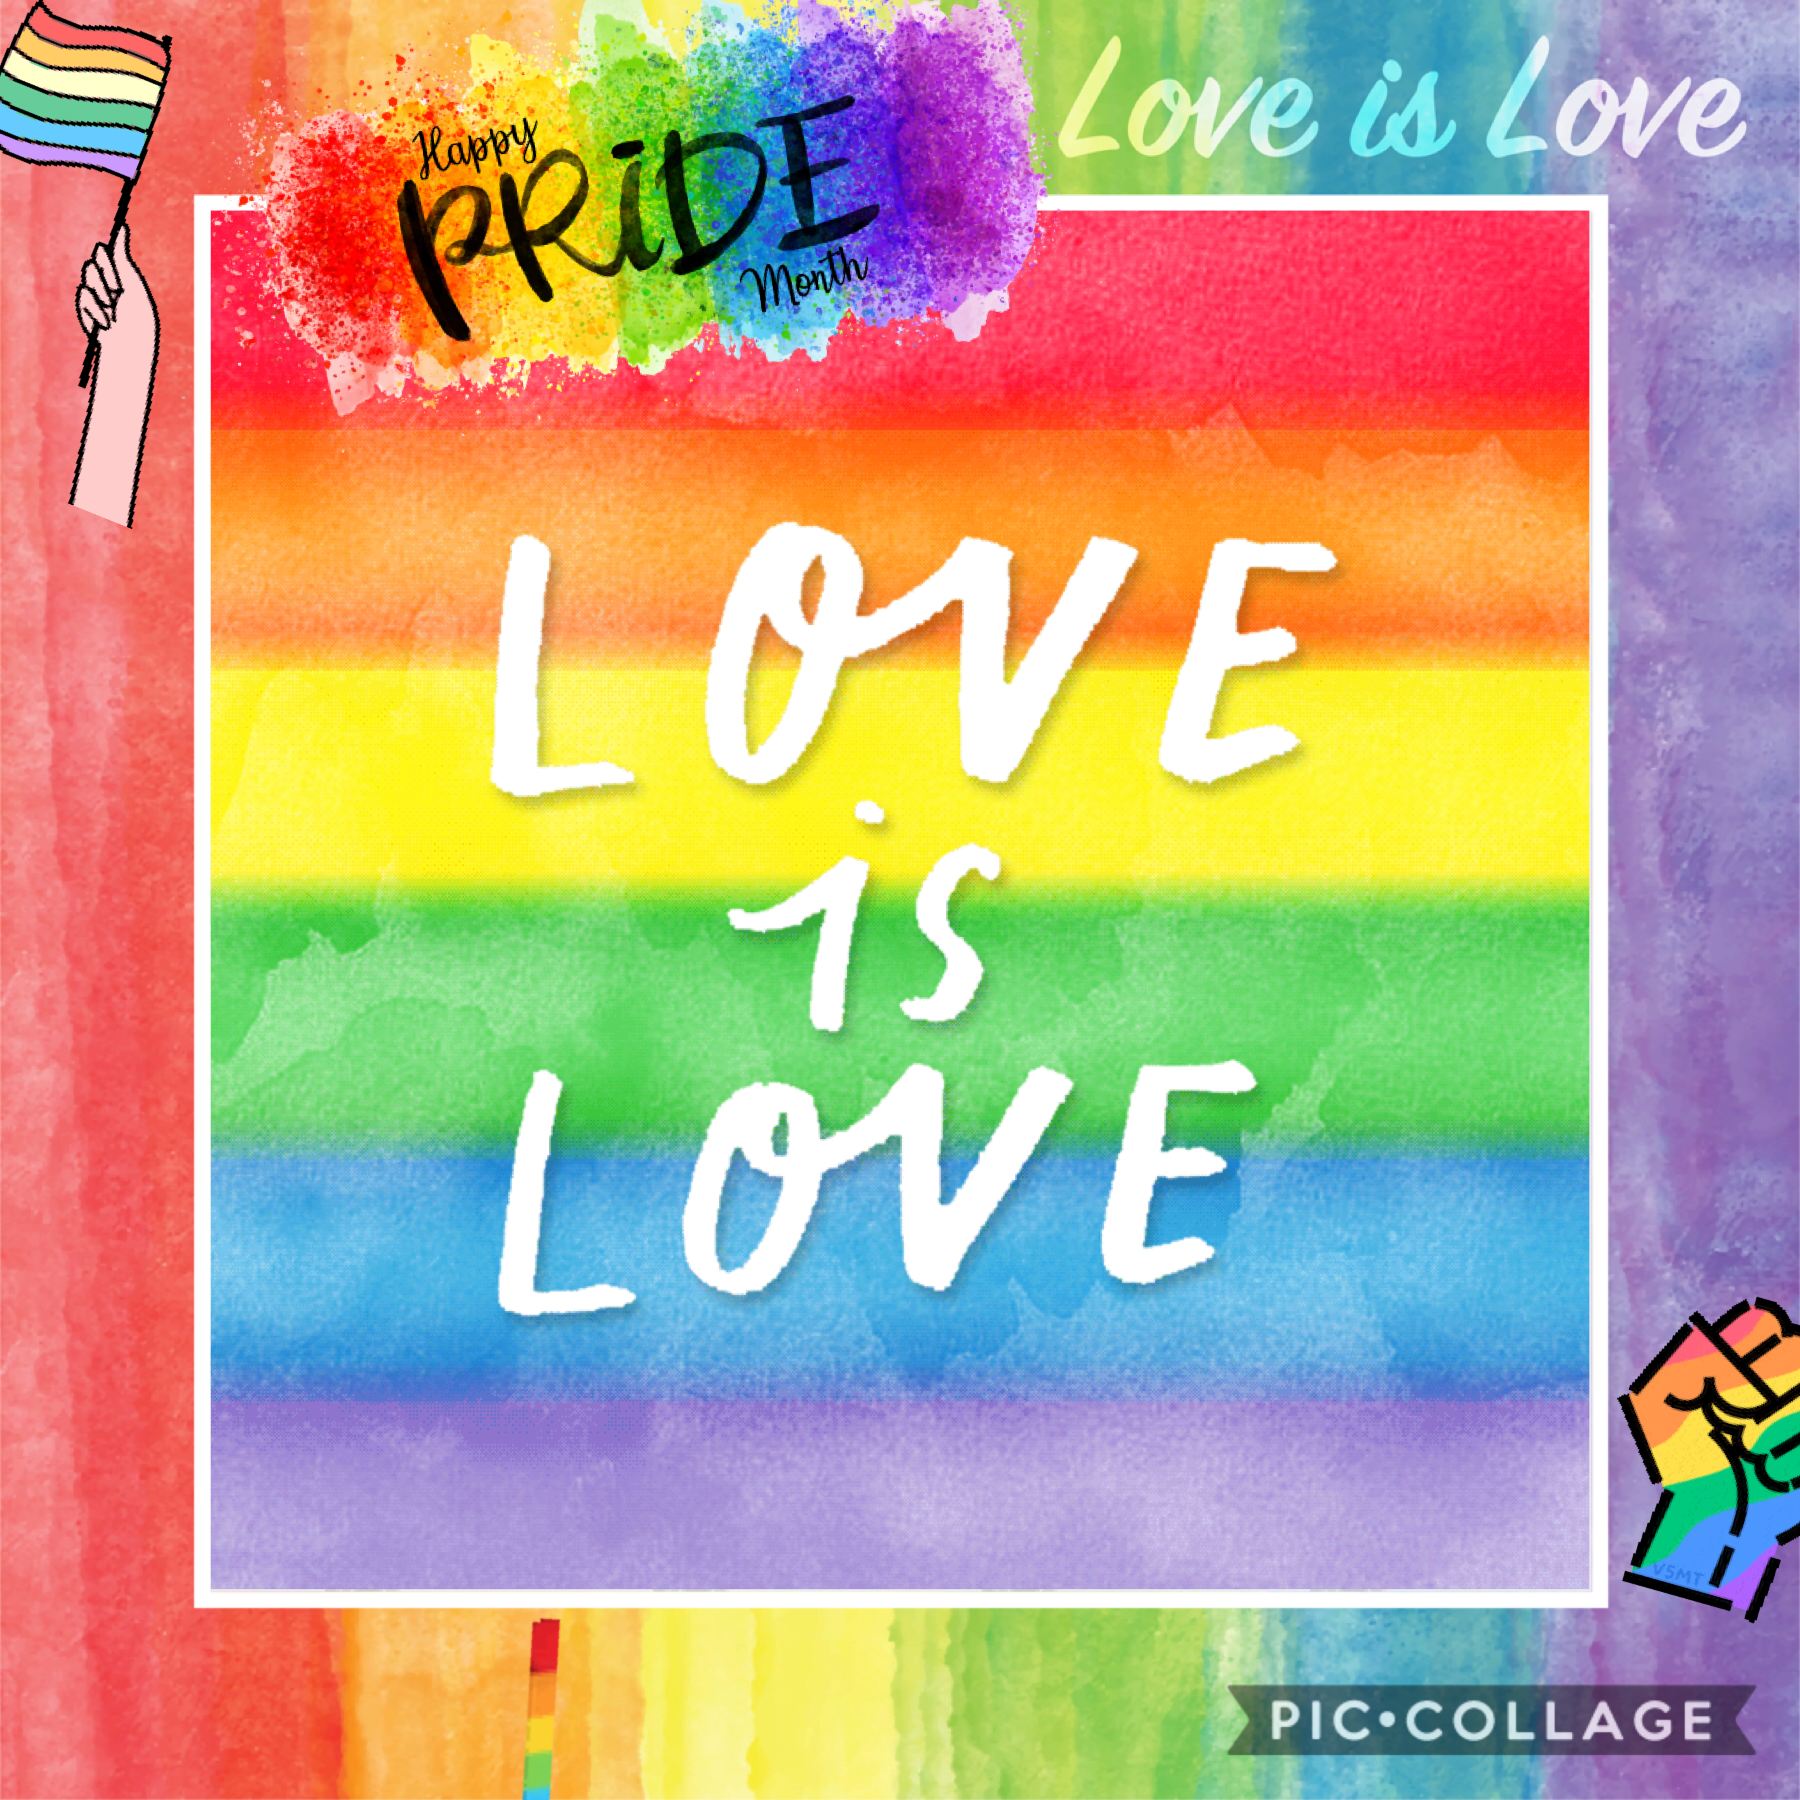 Love is love!! For all you haters out there just stop and go away. For everyone else,
HAPPY PRIDE MONTH!!M🏳️‍🌈🏳️‍🌈🌈🌈🌈❤️🧡💛💚💙💜